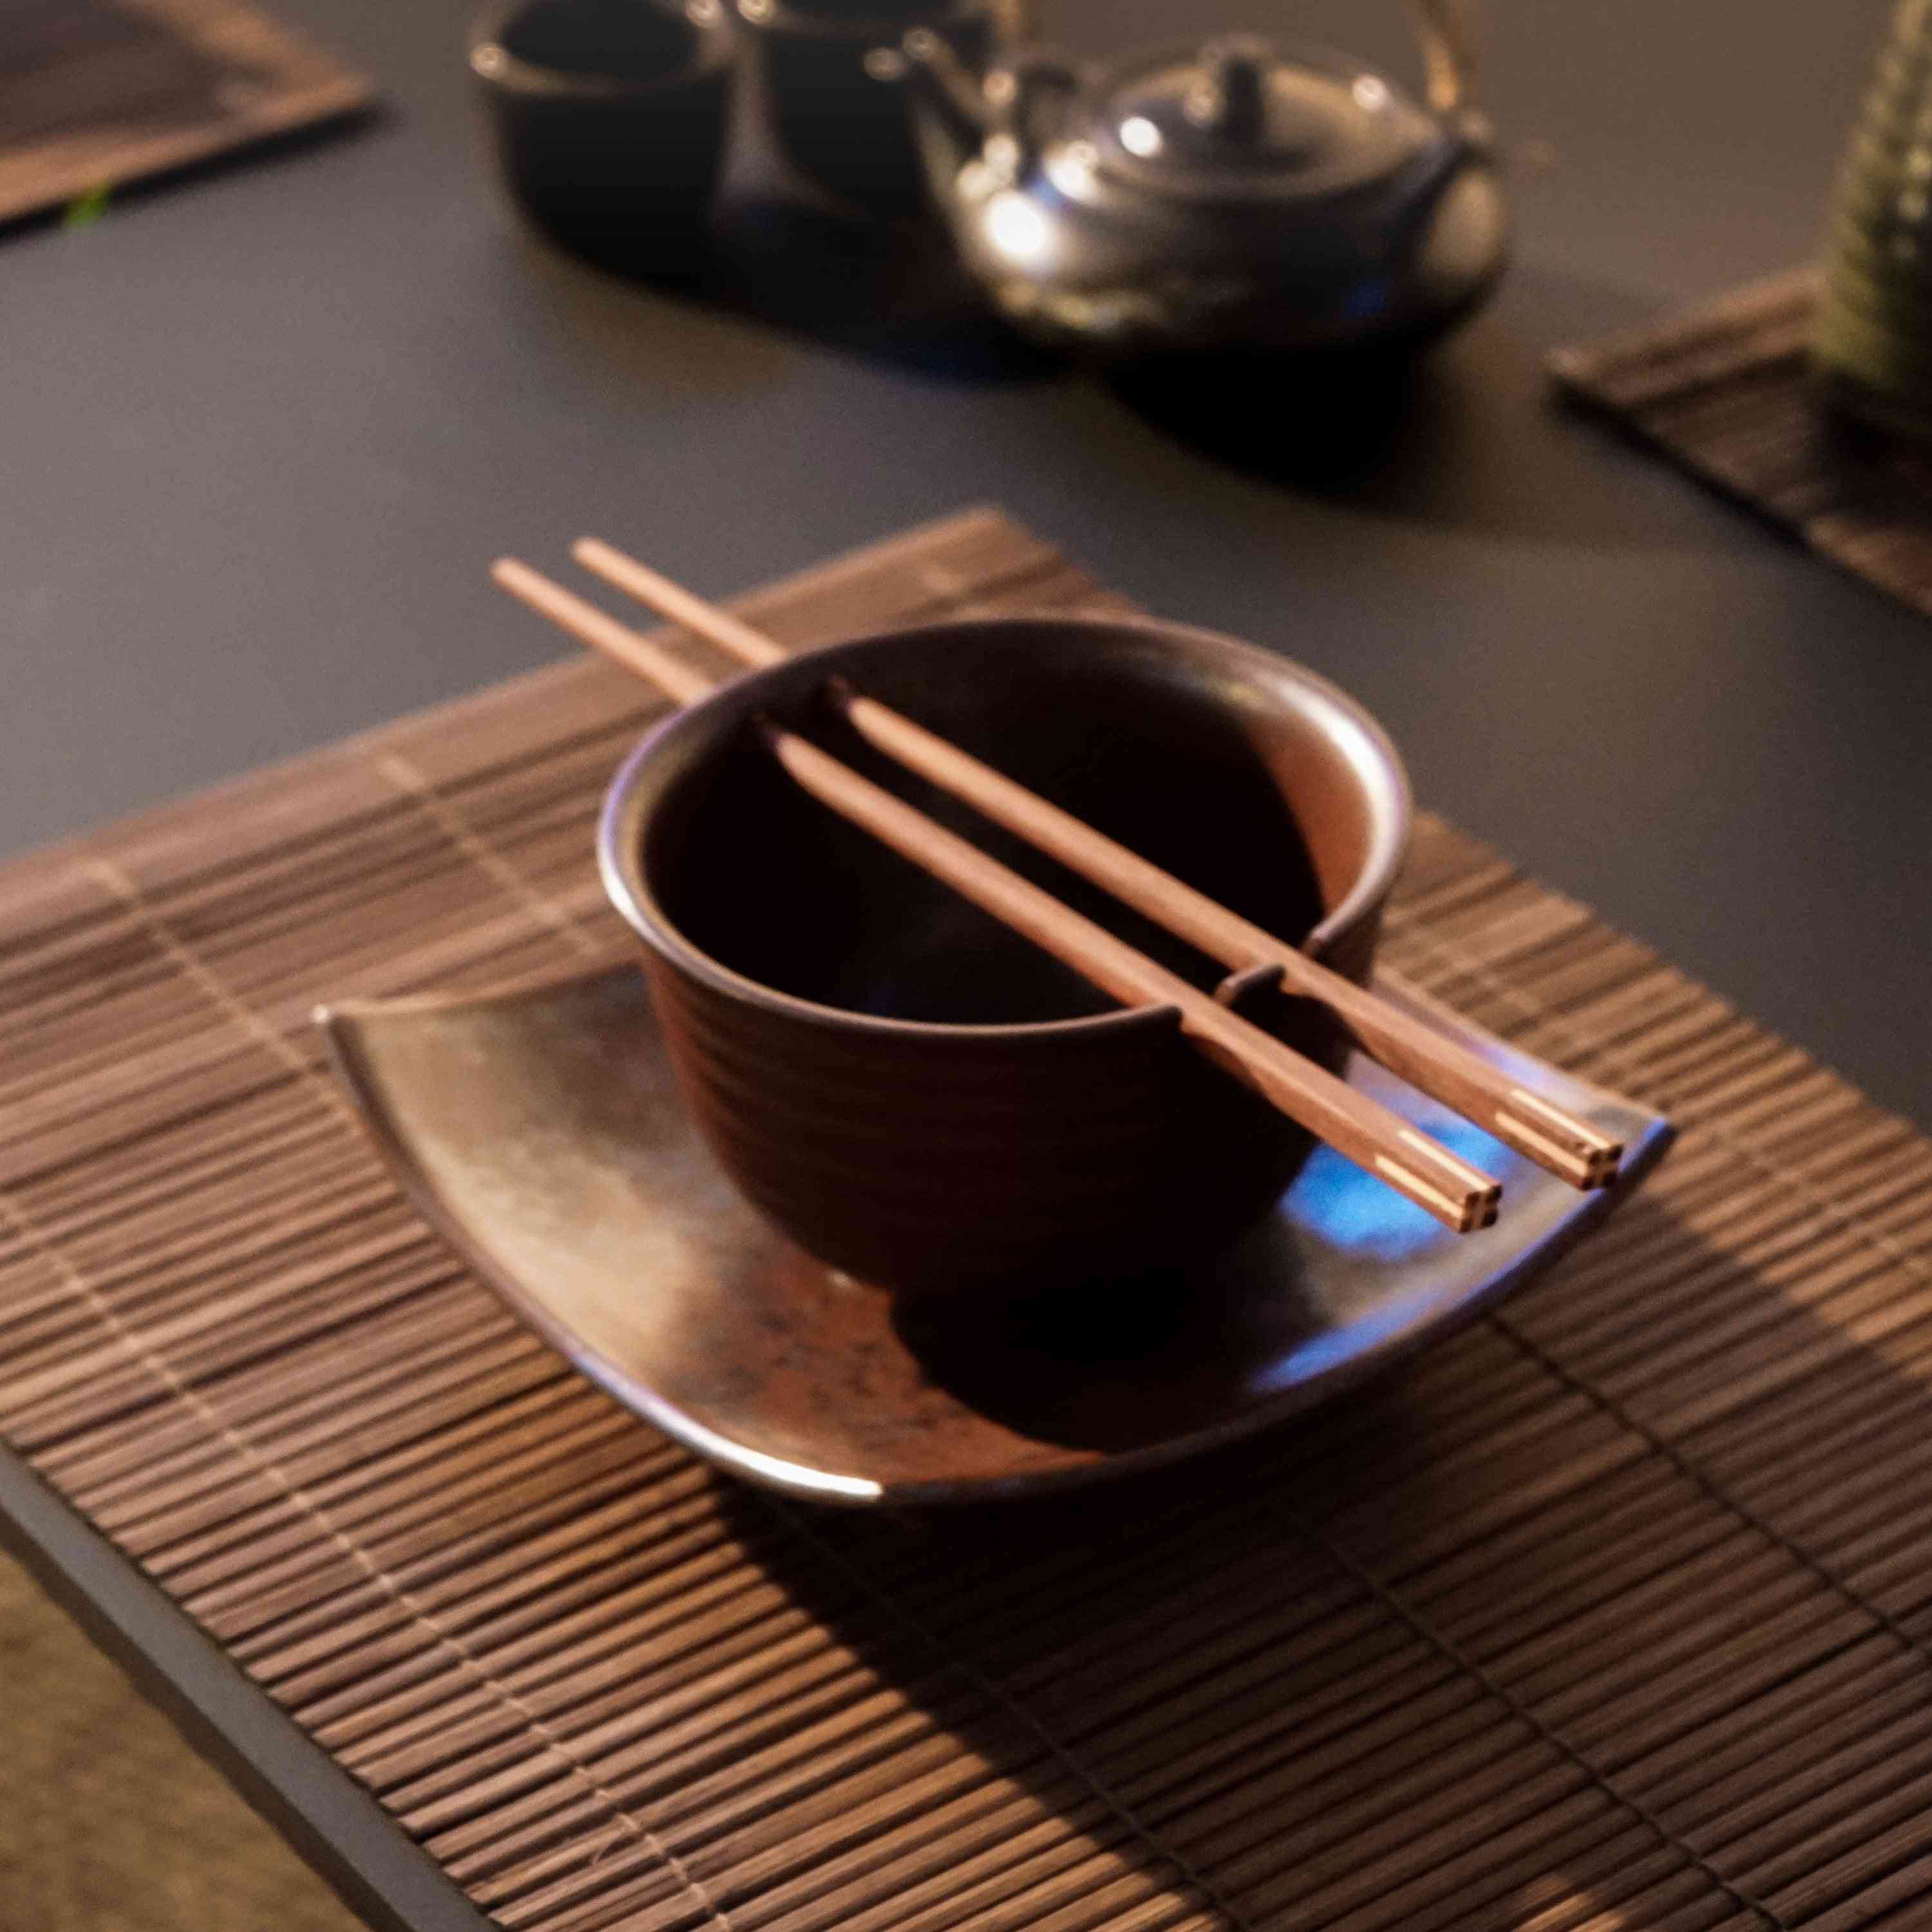 Rust Glaze Rice Bowl With Square Plate And Chopsticks Set